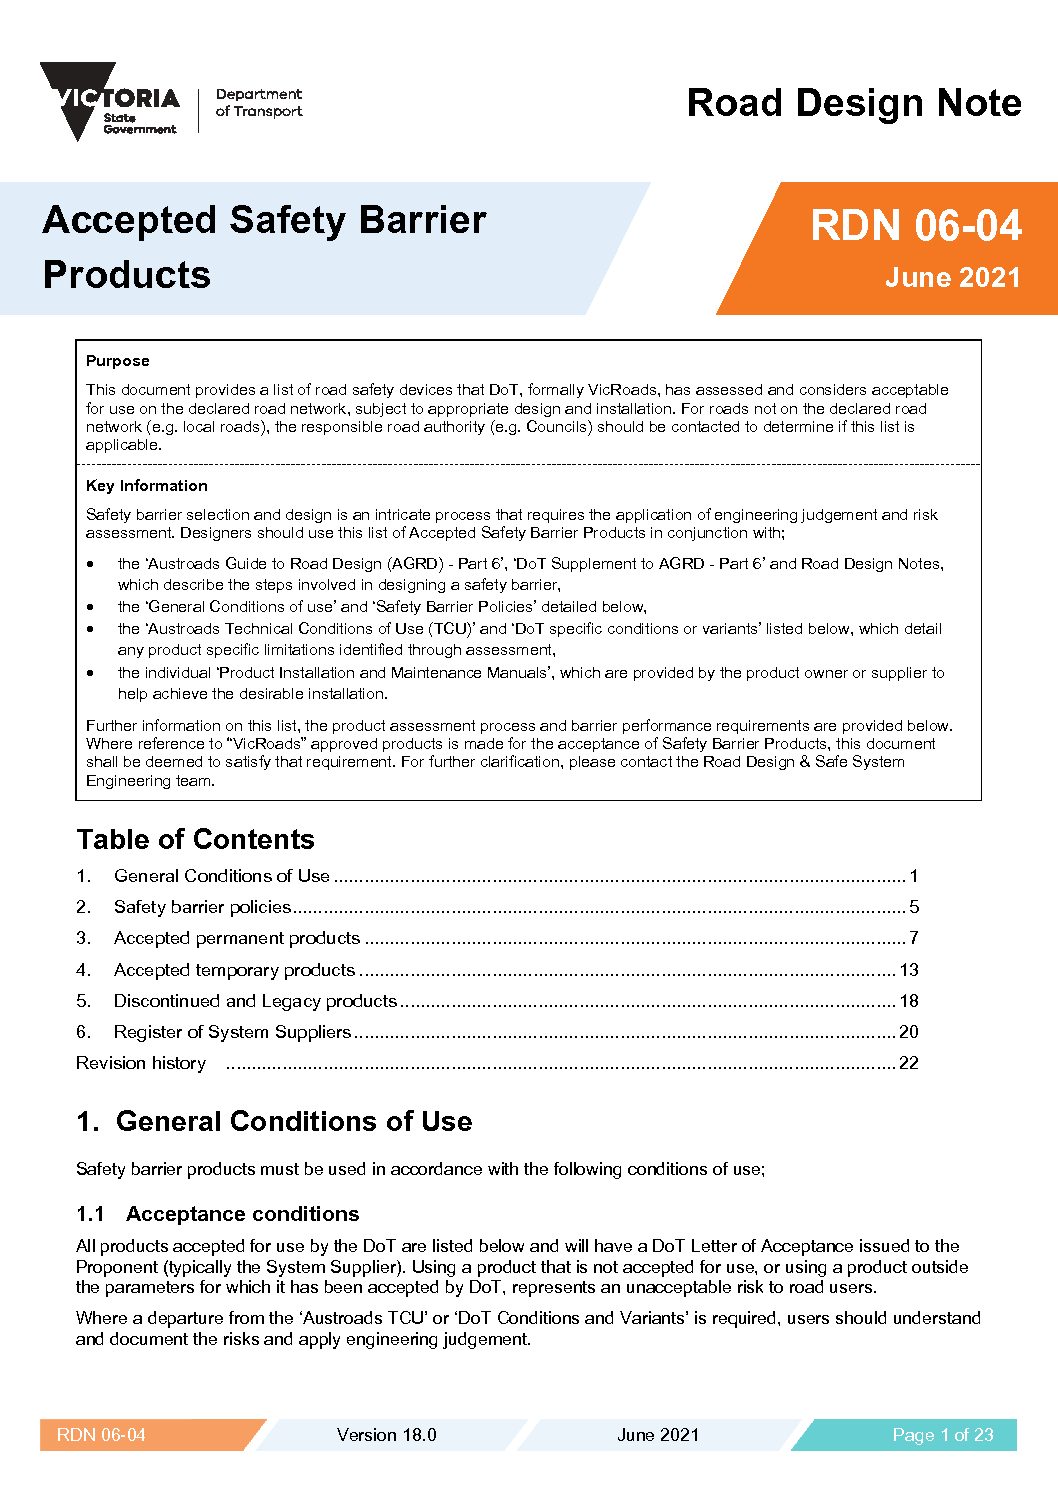 Accepted Safety Barrier Products